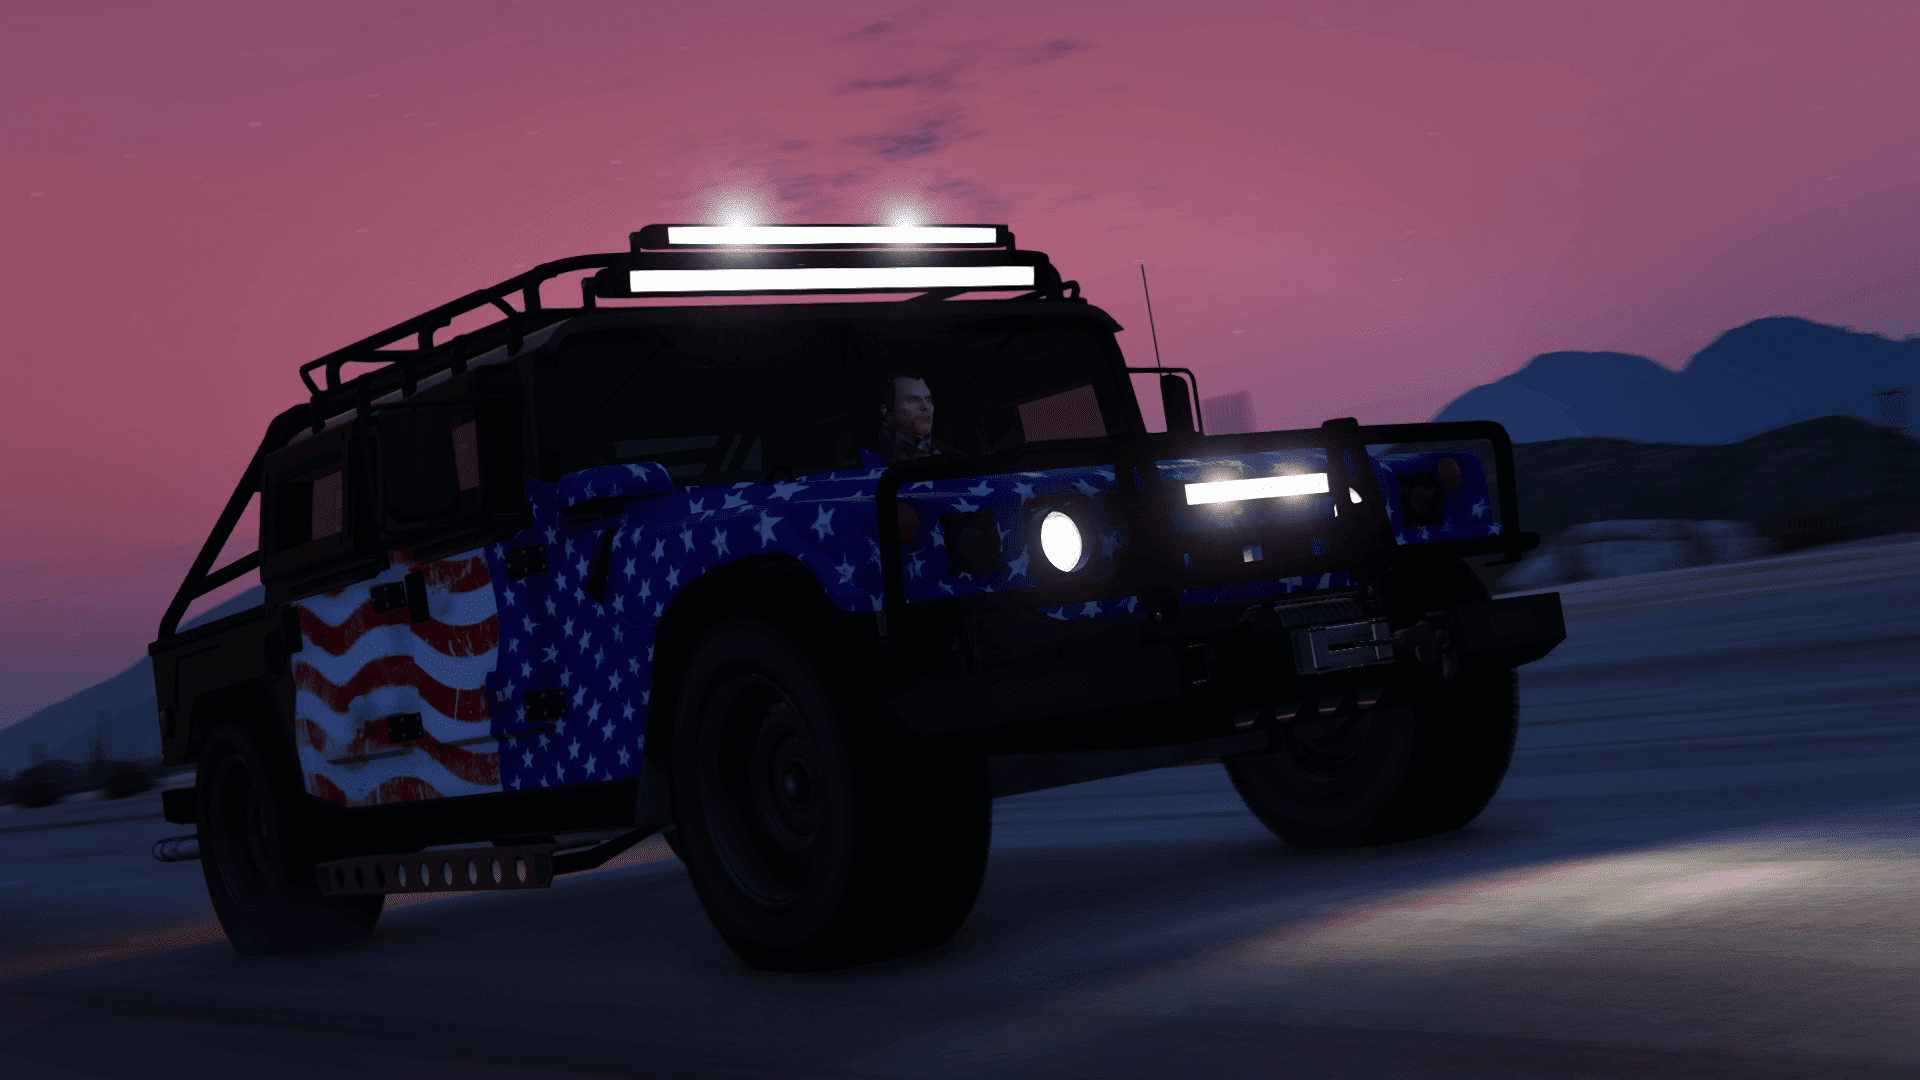 (HD) An SPD sneak on The Contract dripfeed: a long time hauler returns in the form of the Mammoth Patriot Mil-Spec